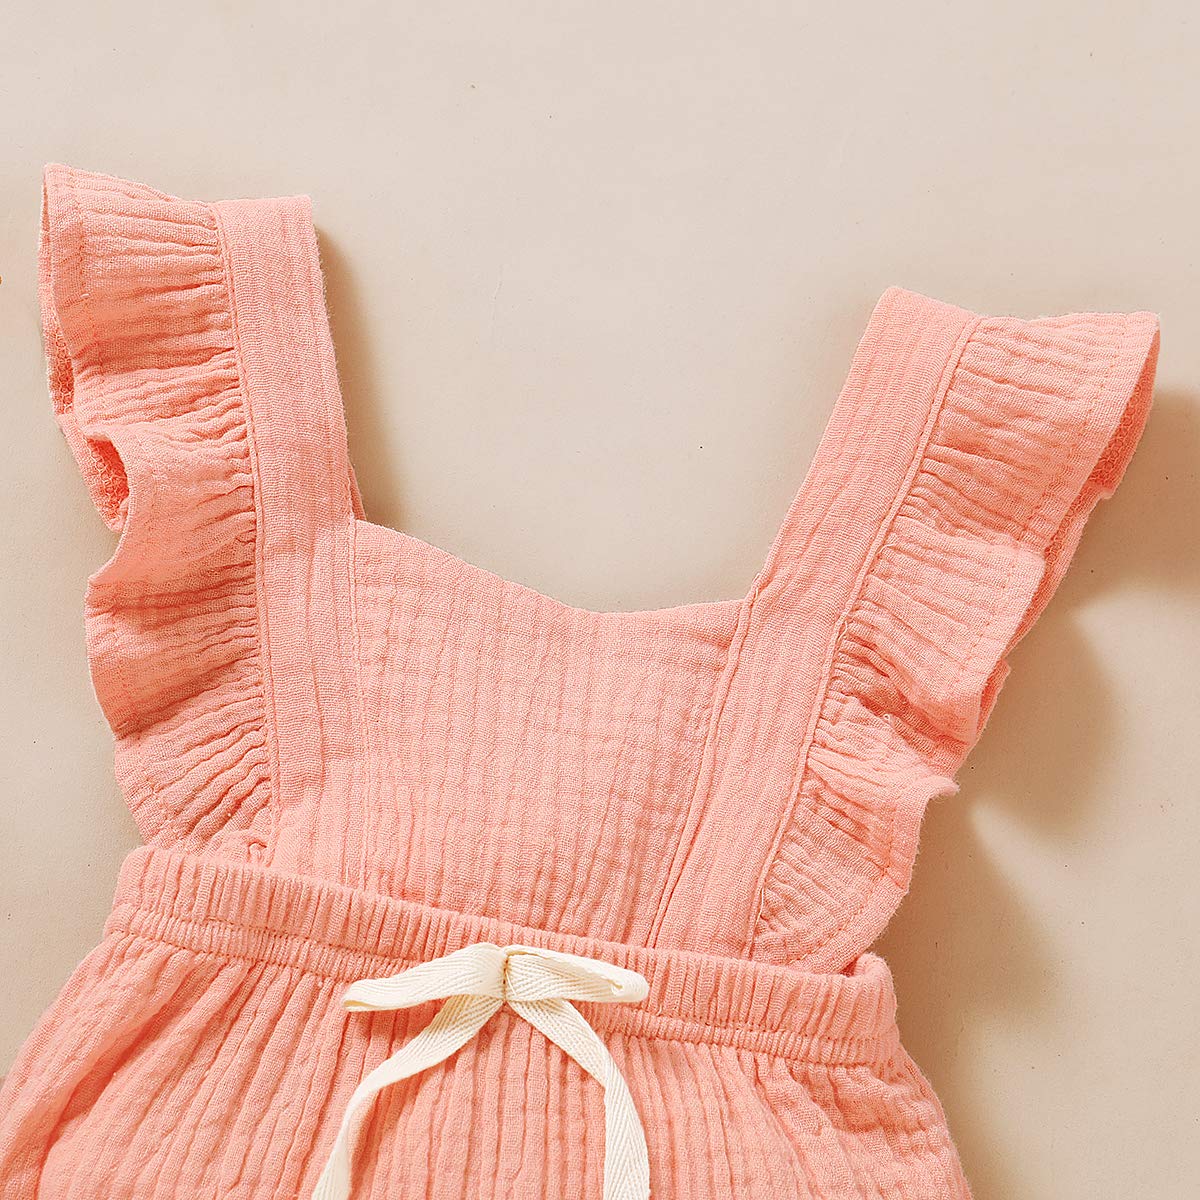 YOUNGER TREE Toddler Baby Girl Ruffled Sleeveless Romper Casual Summer Jumpsuit Cotton Linen Clothes 3-6 Months